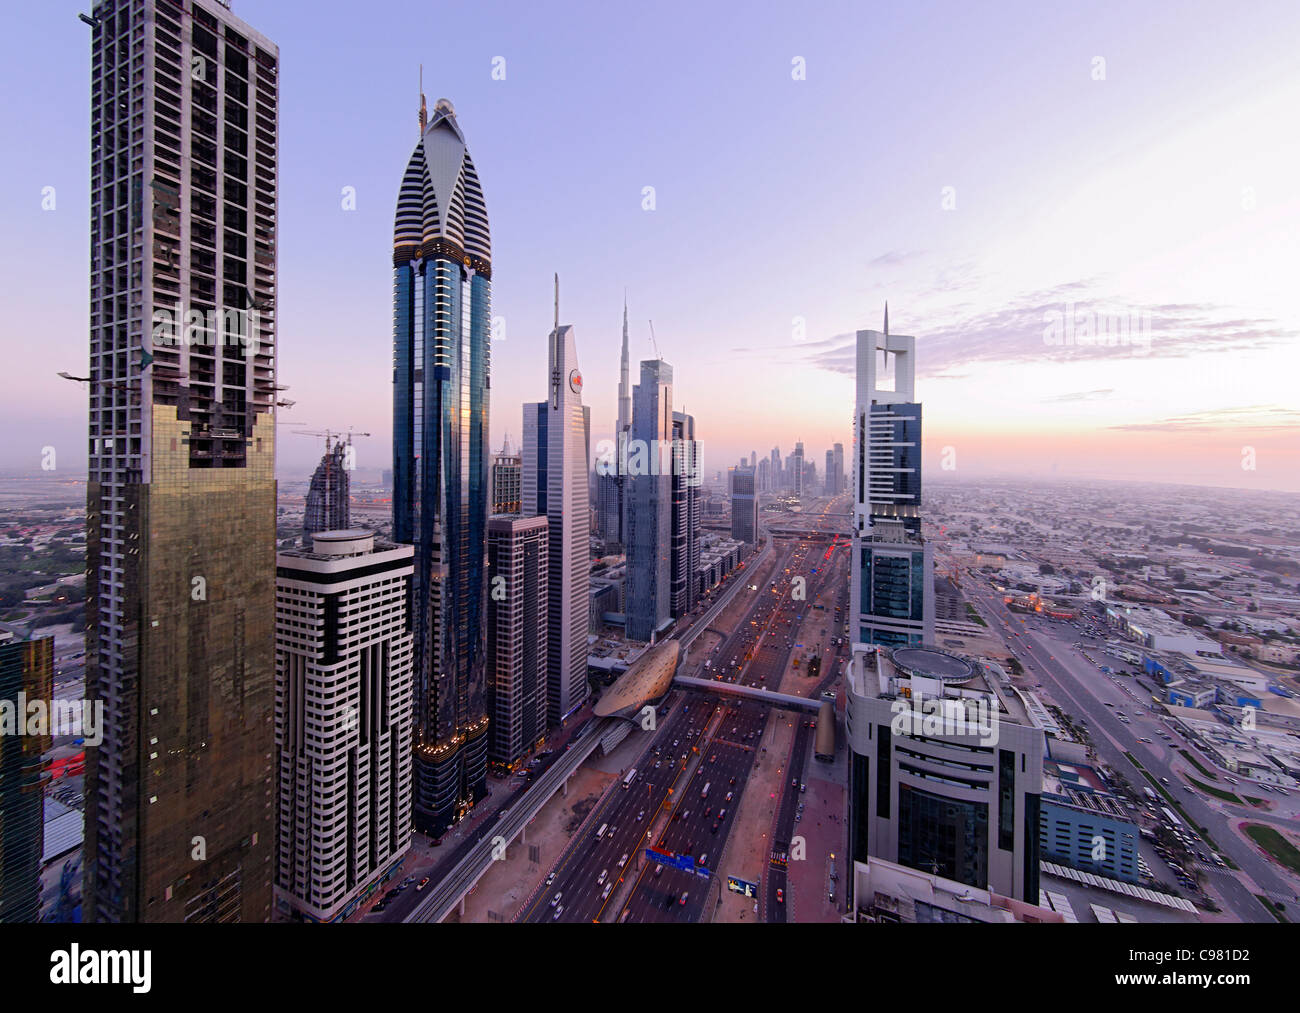 View of downtown Dubai, towers, skyscrapers, hotels, modern architecture, Sheikh Zayed Road, Financial District, Dubai Stock Photo